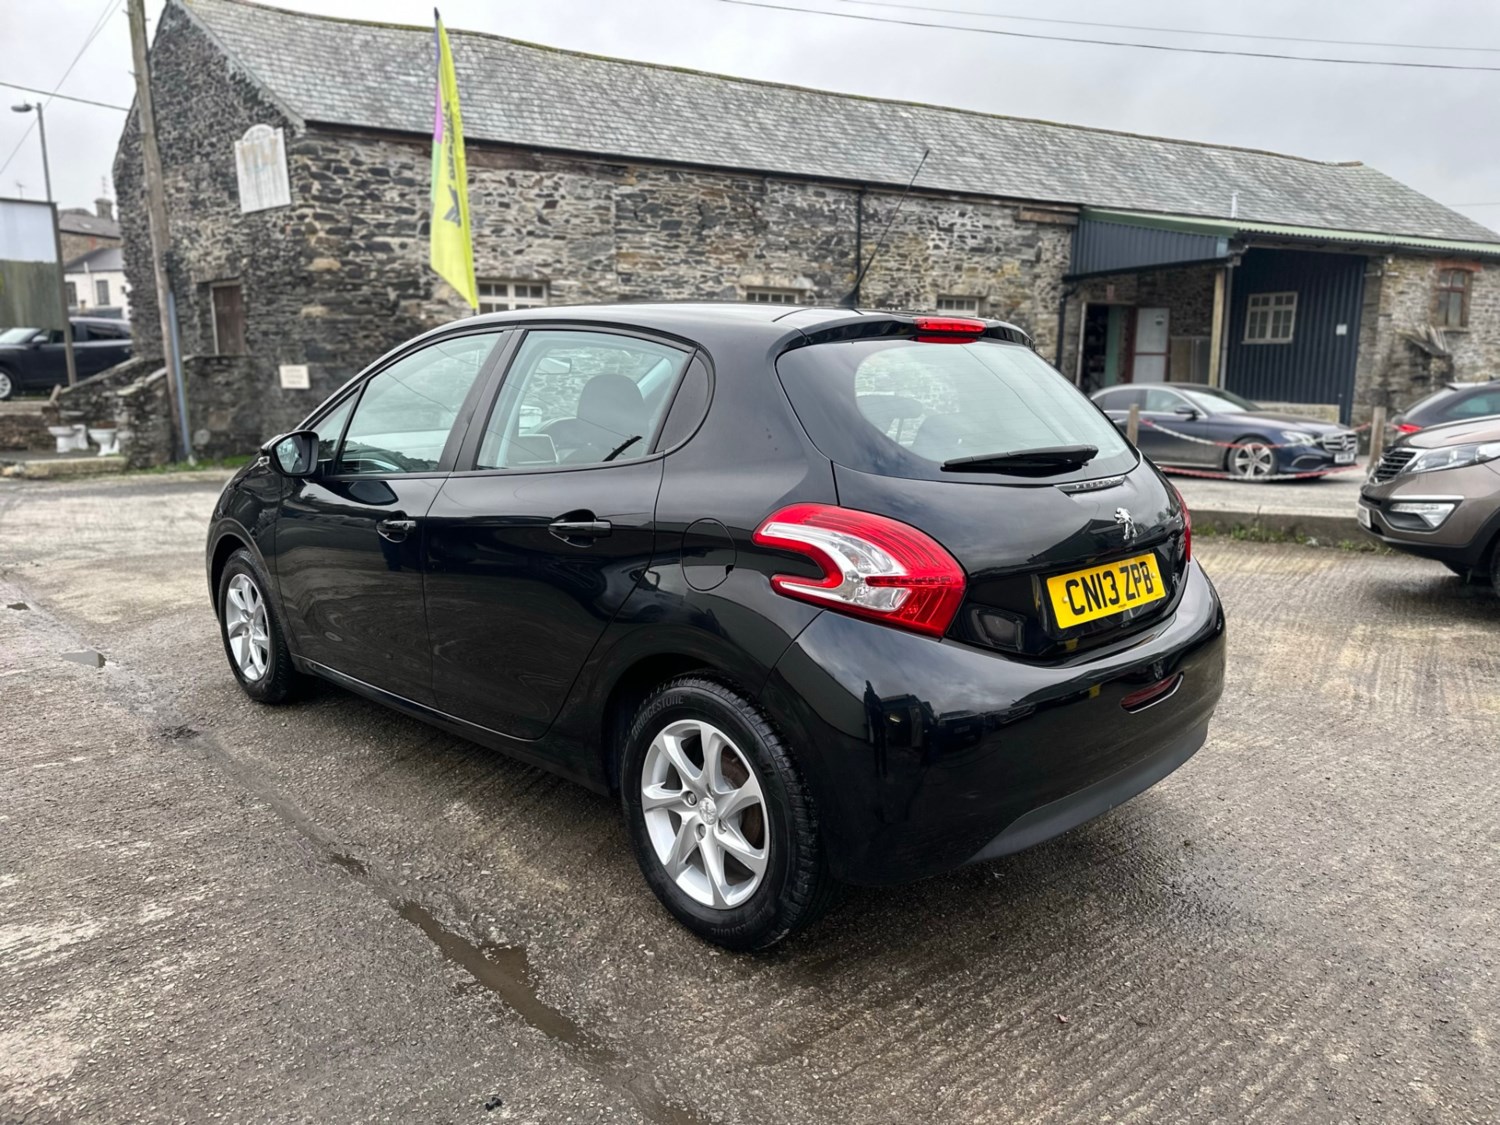 2013 (13) Peugeot 208 1.4 HDi Active 5dr For Sale In Launceston, Cornwall